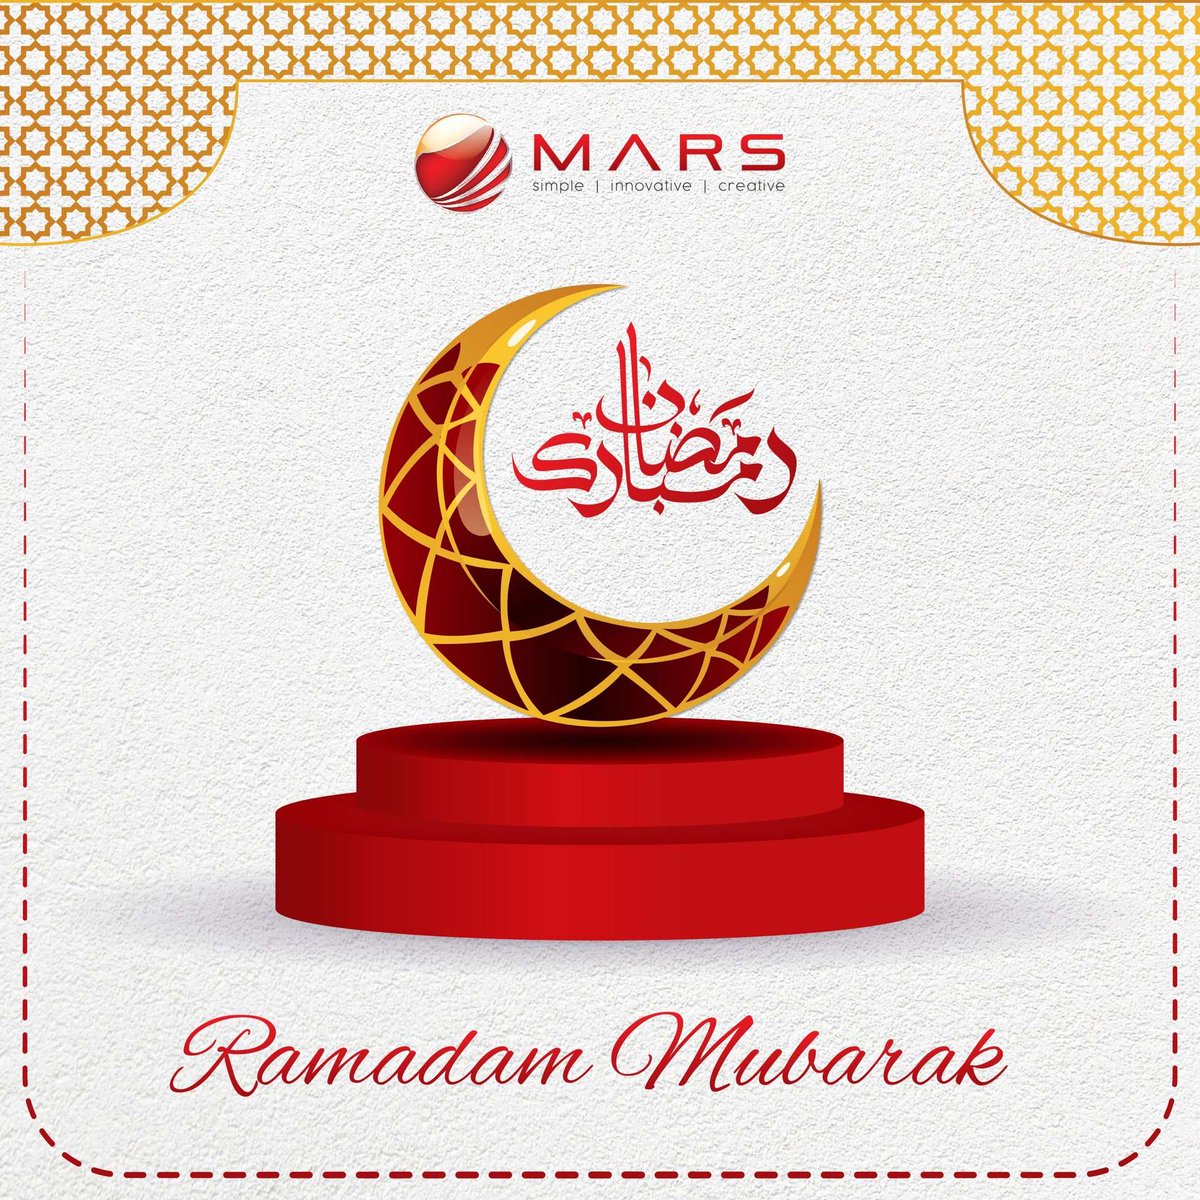 Ramadan Mubarak to all! May this holy month bring you peace, blessings, and spiritual rejuvenation.😇

#ramadan2023 #RamadanMubarak #blessings #peace #spiritualrejuvenation